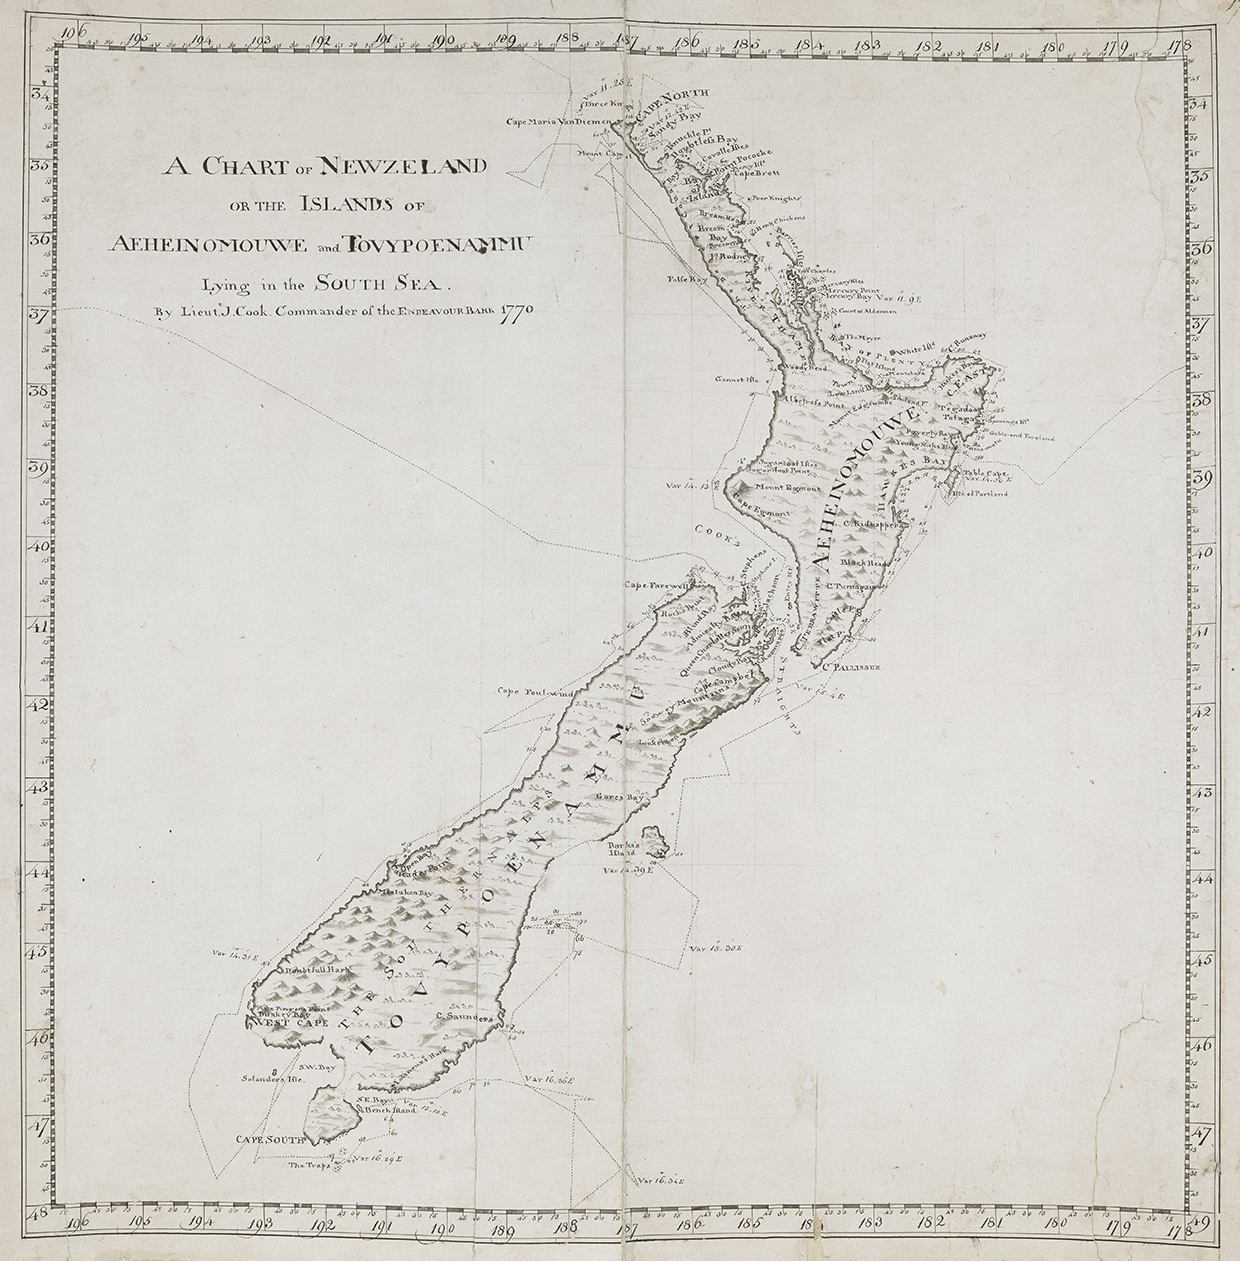 Cook's chart of New Zealand, the first in history. Cook's charts were still being used for navigation in the 1950s.